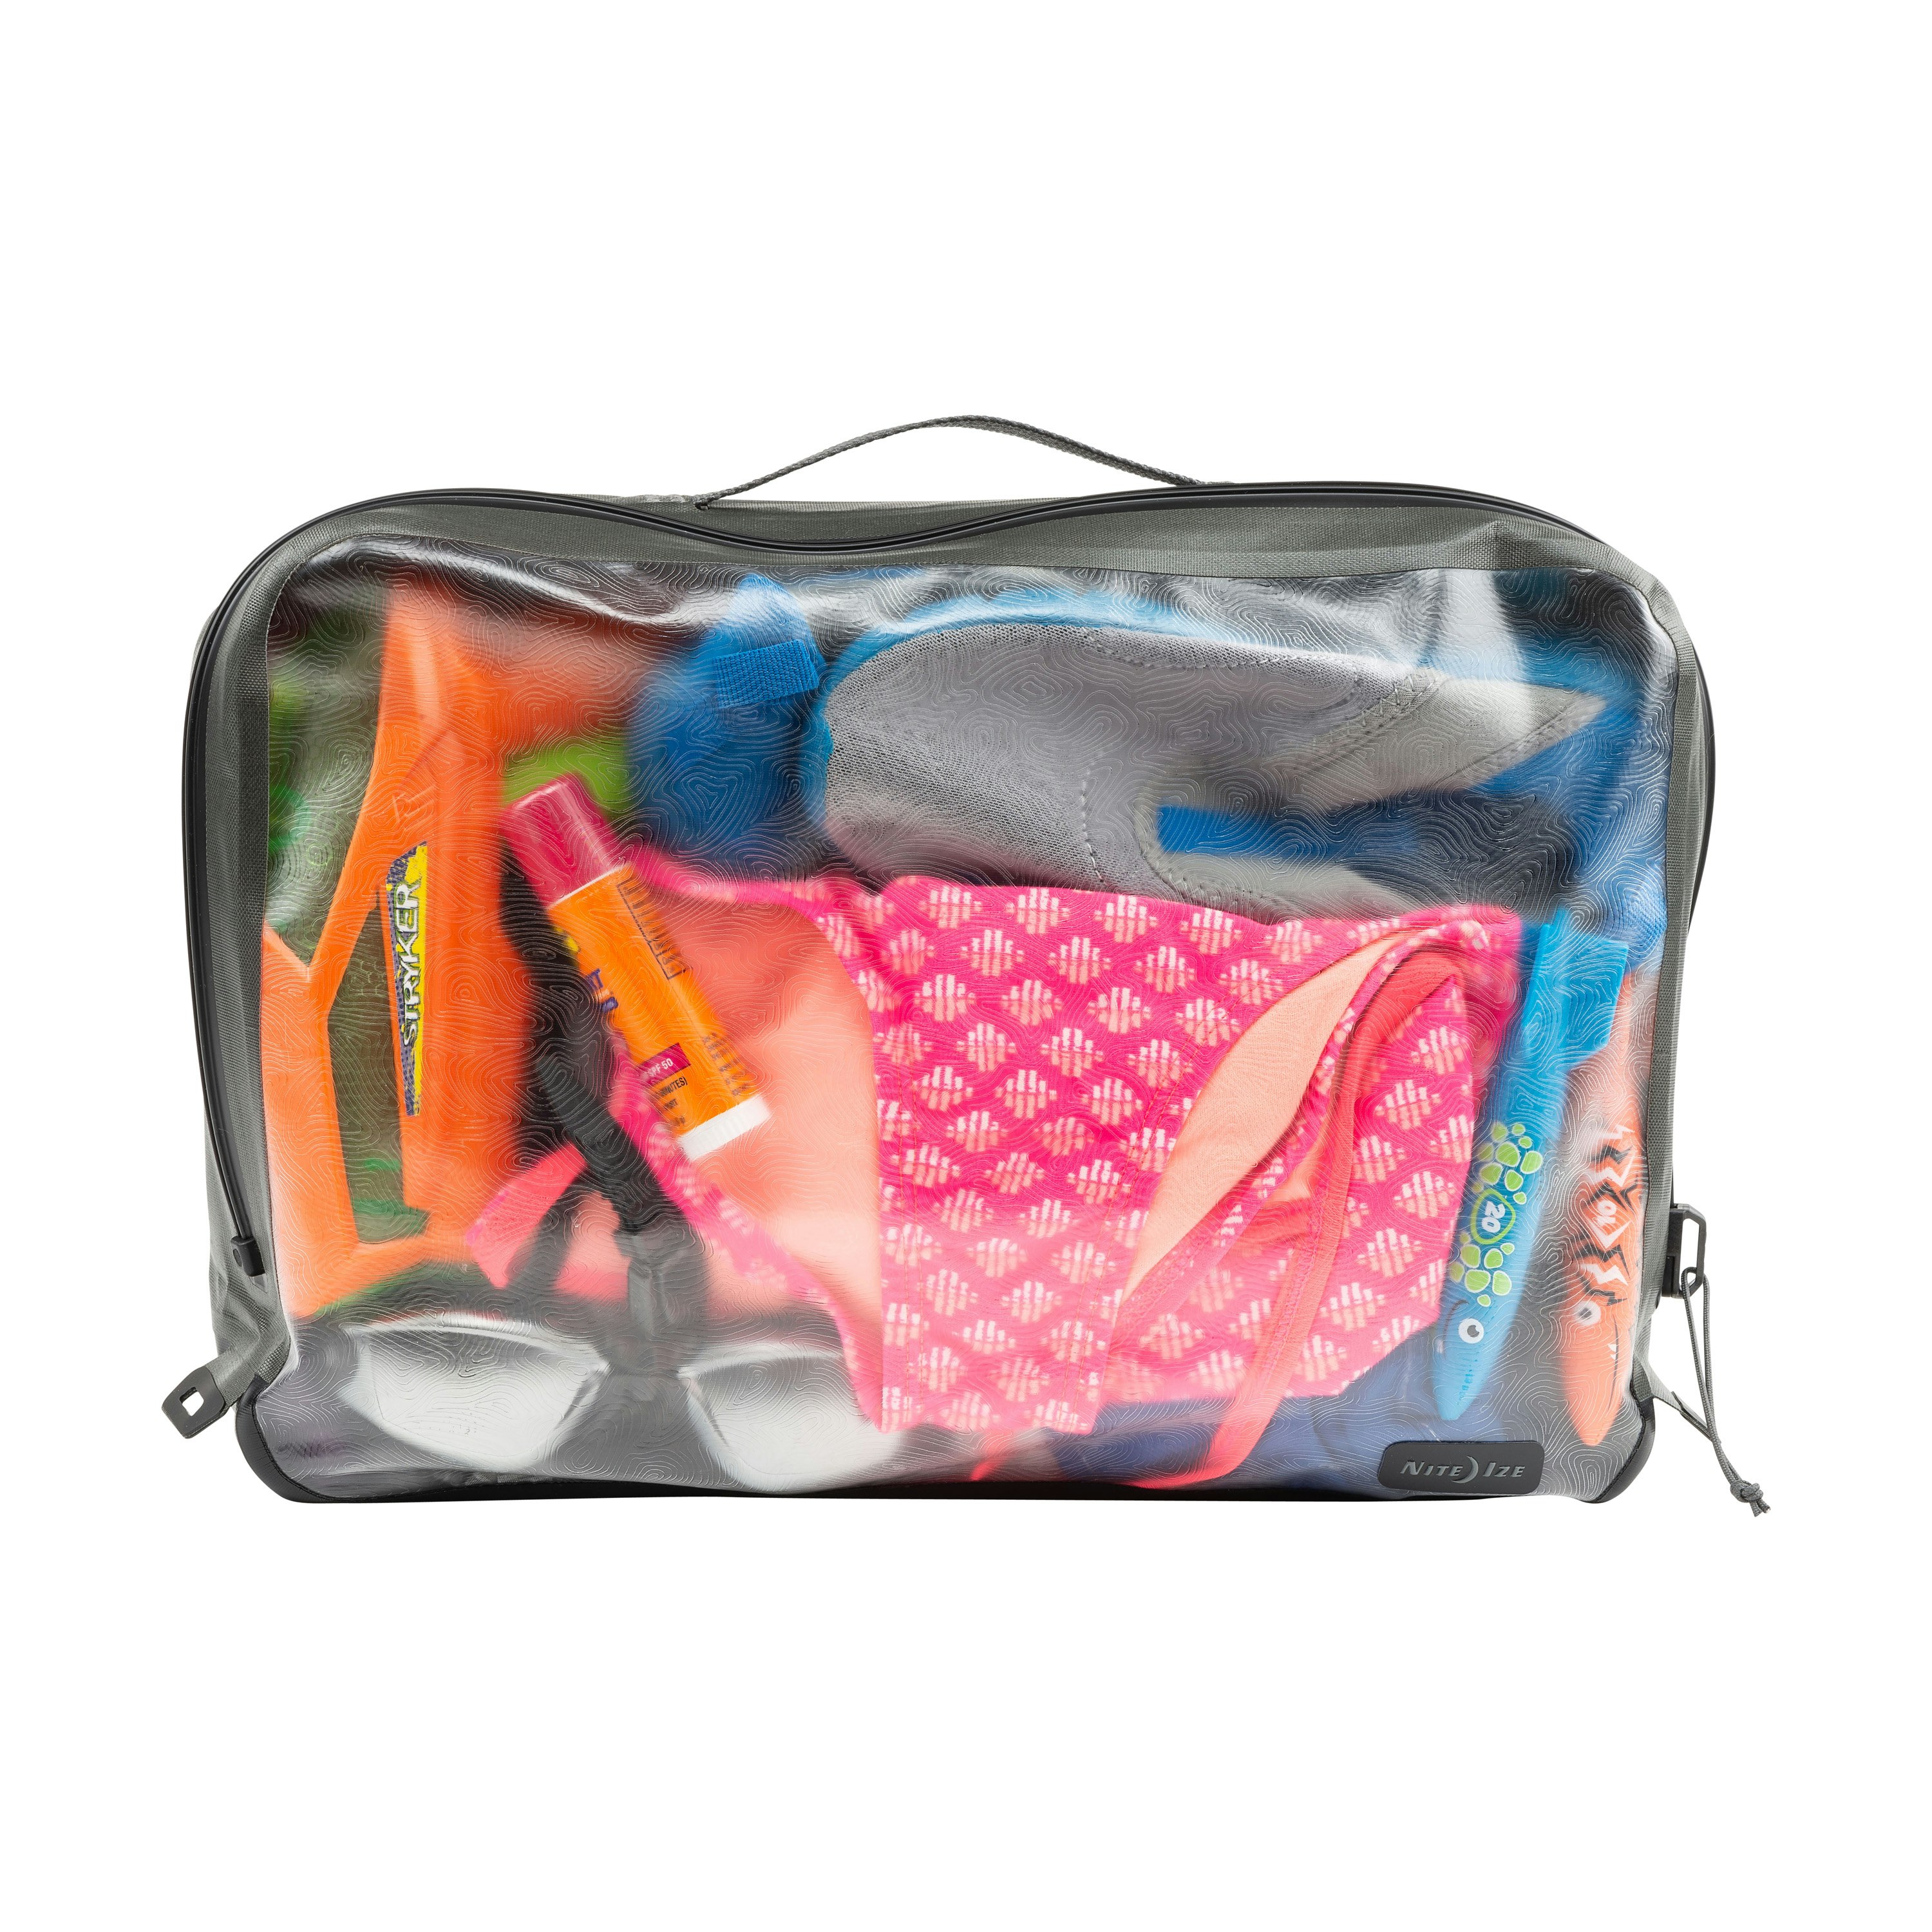 A clear, thick plastic bag with black edges shows the slightly distorted contents of a bright swimsuit in a pink pattern, an orange and pink chapstick, swim goggles, and other aquatic beach gear.